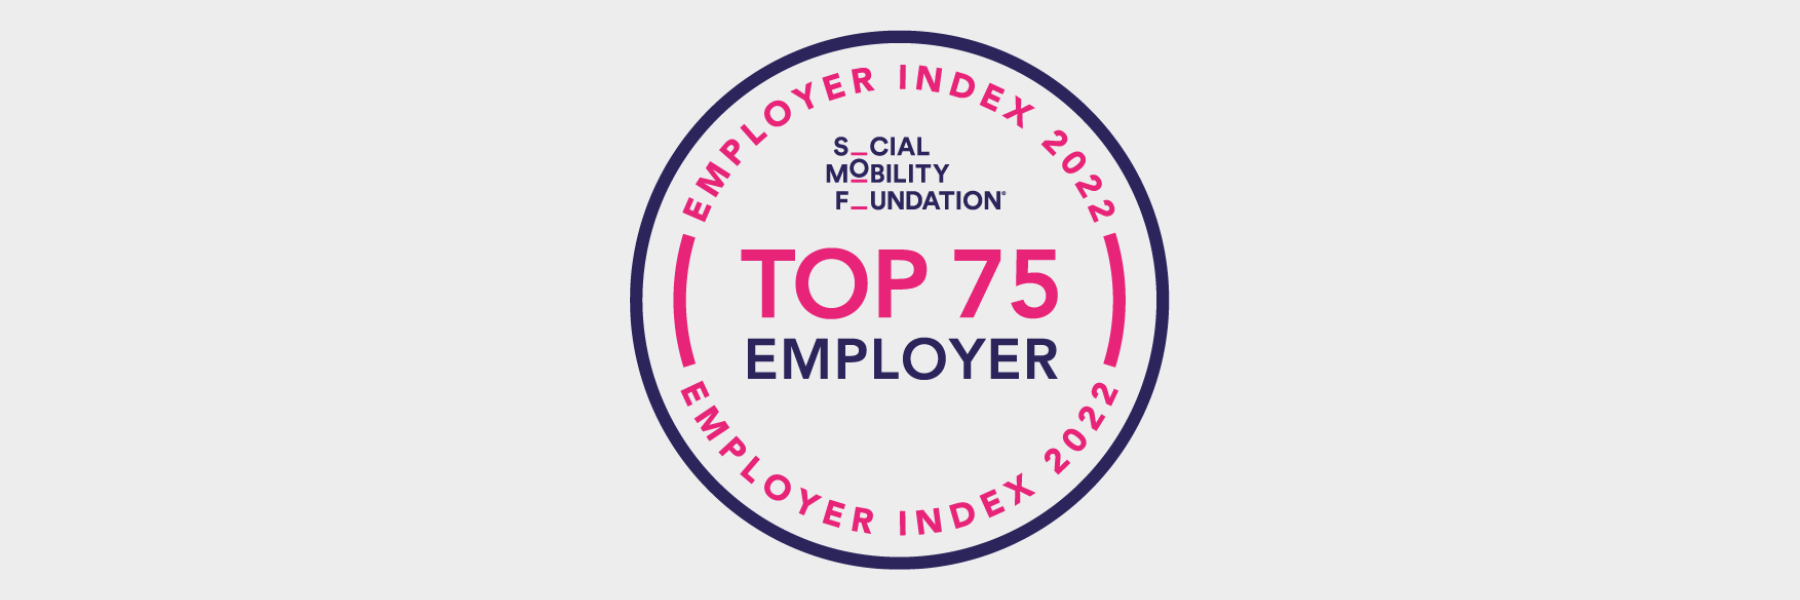 DfT ranked among top 75 in Social Mobility Employer Index